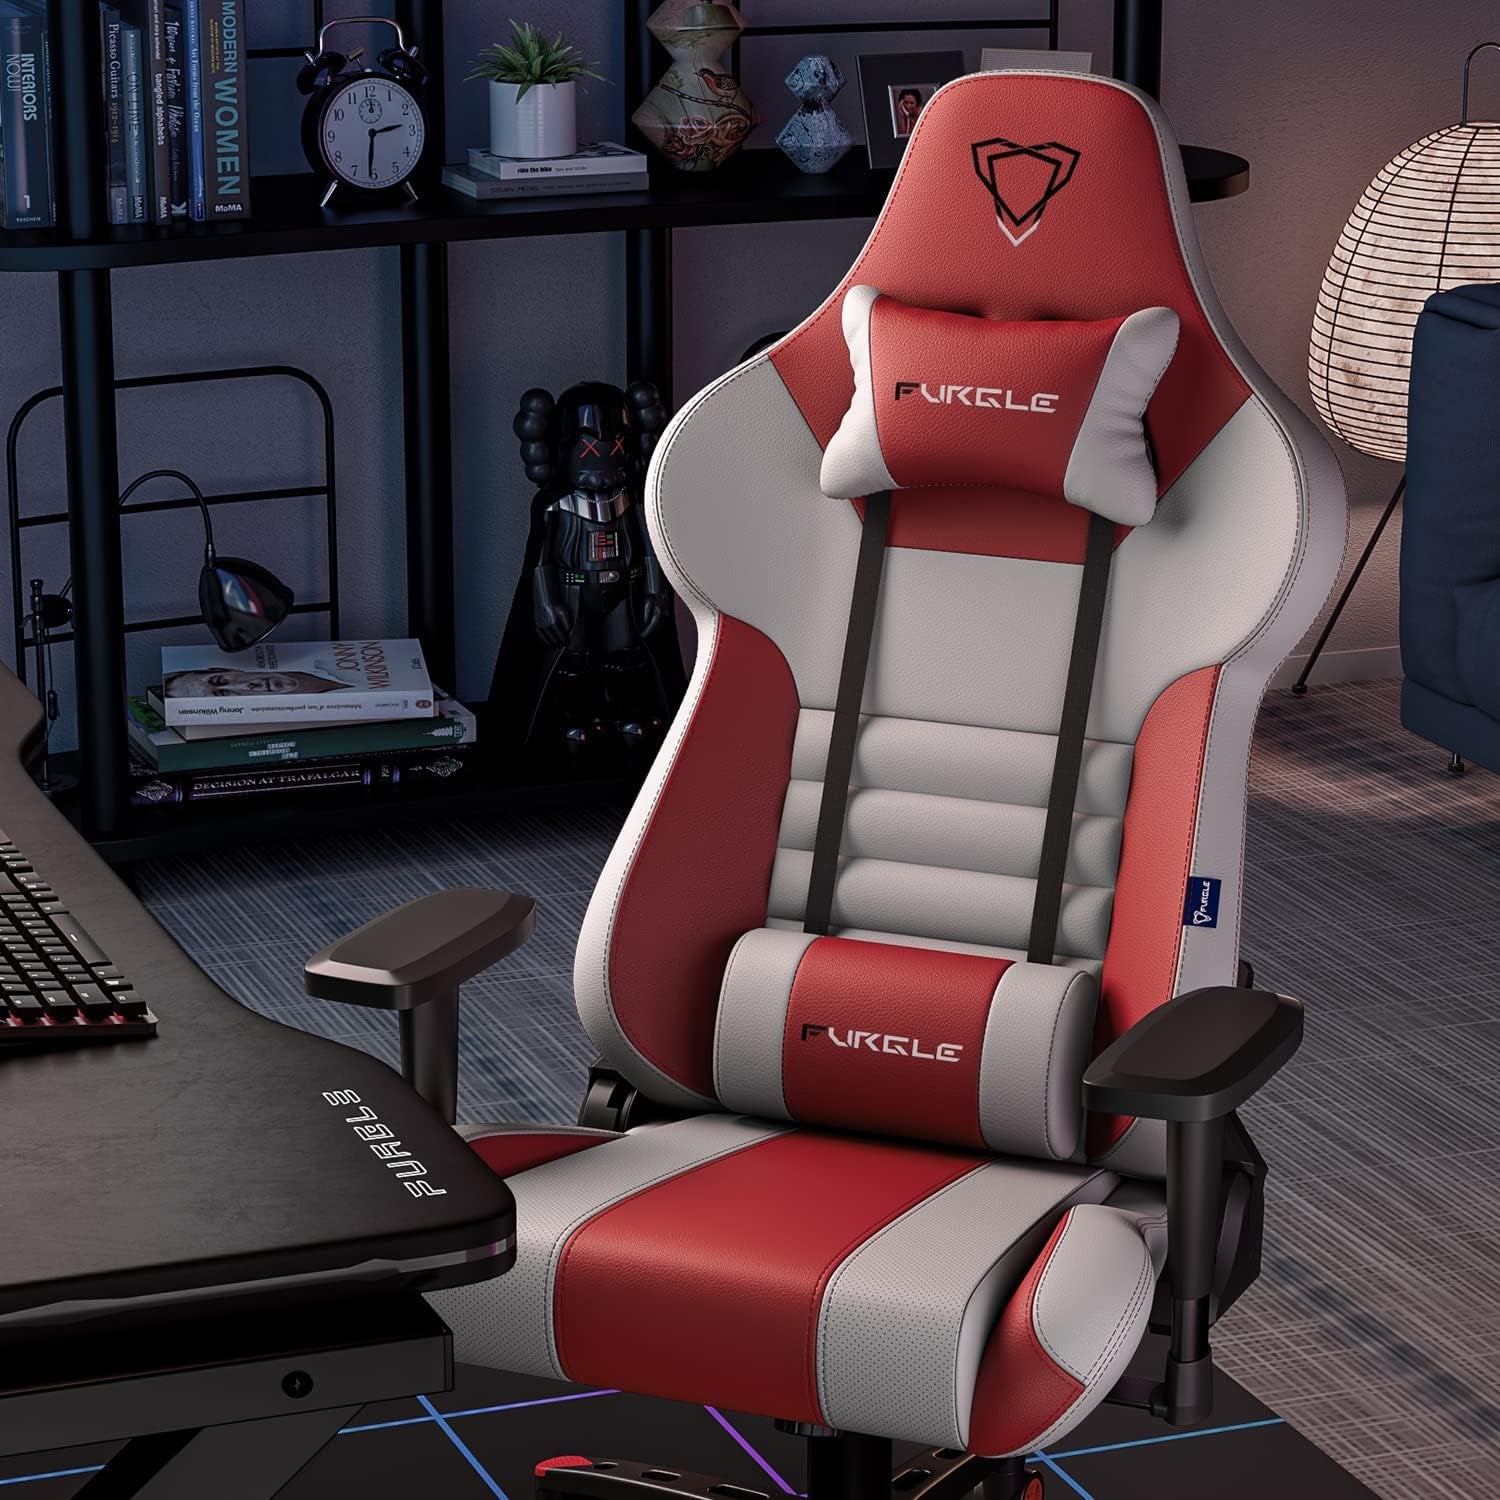 Gaming Chair Computer Chair - Racing Style High-Back Office Chair - PU Leather Ergonomic Video Game Chairs - Adjustable Armrests - Headrest and Lumbar Support - Rocking Mode -White/Red